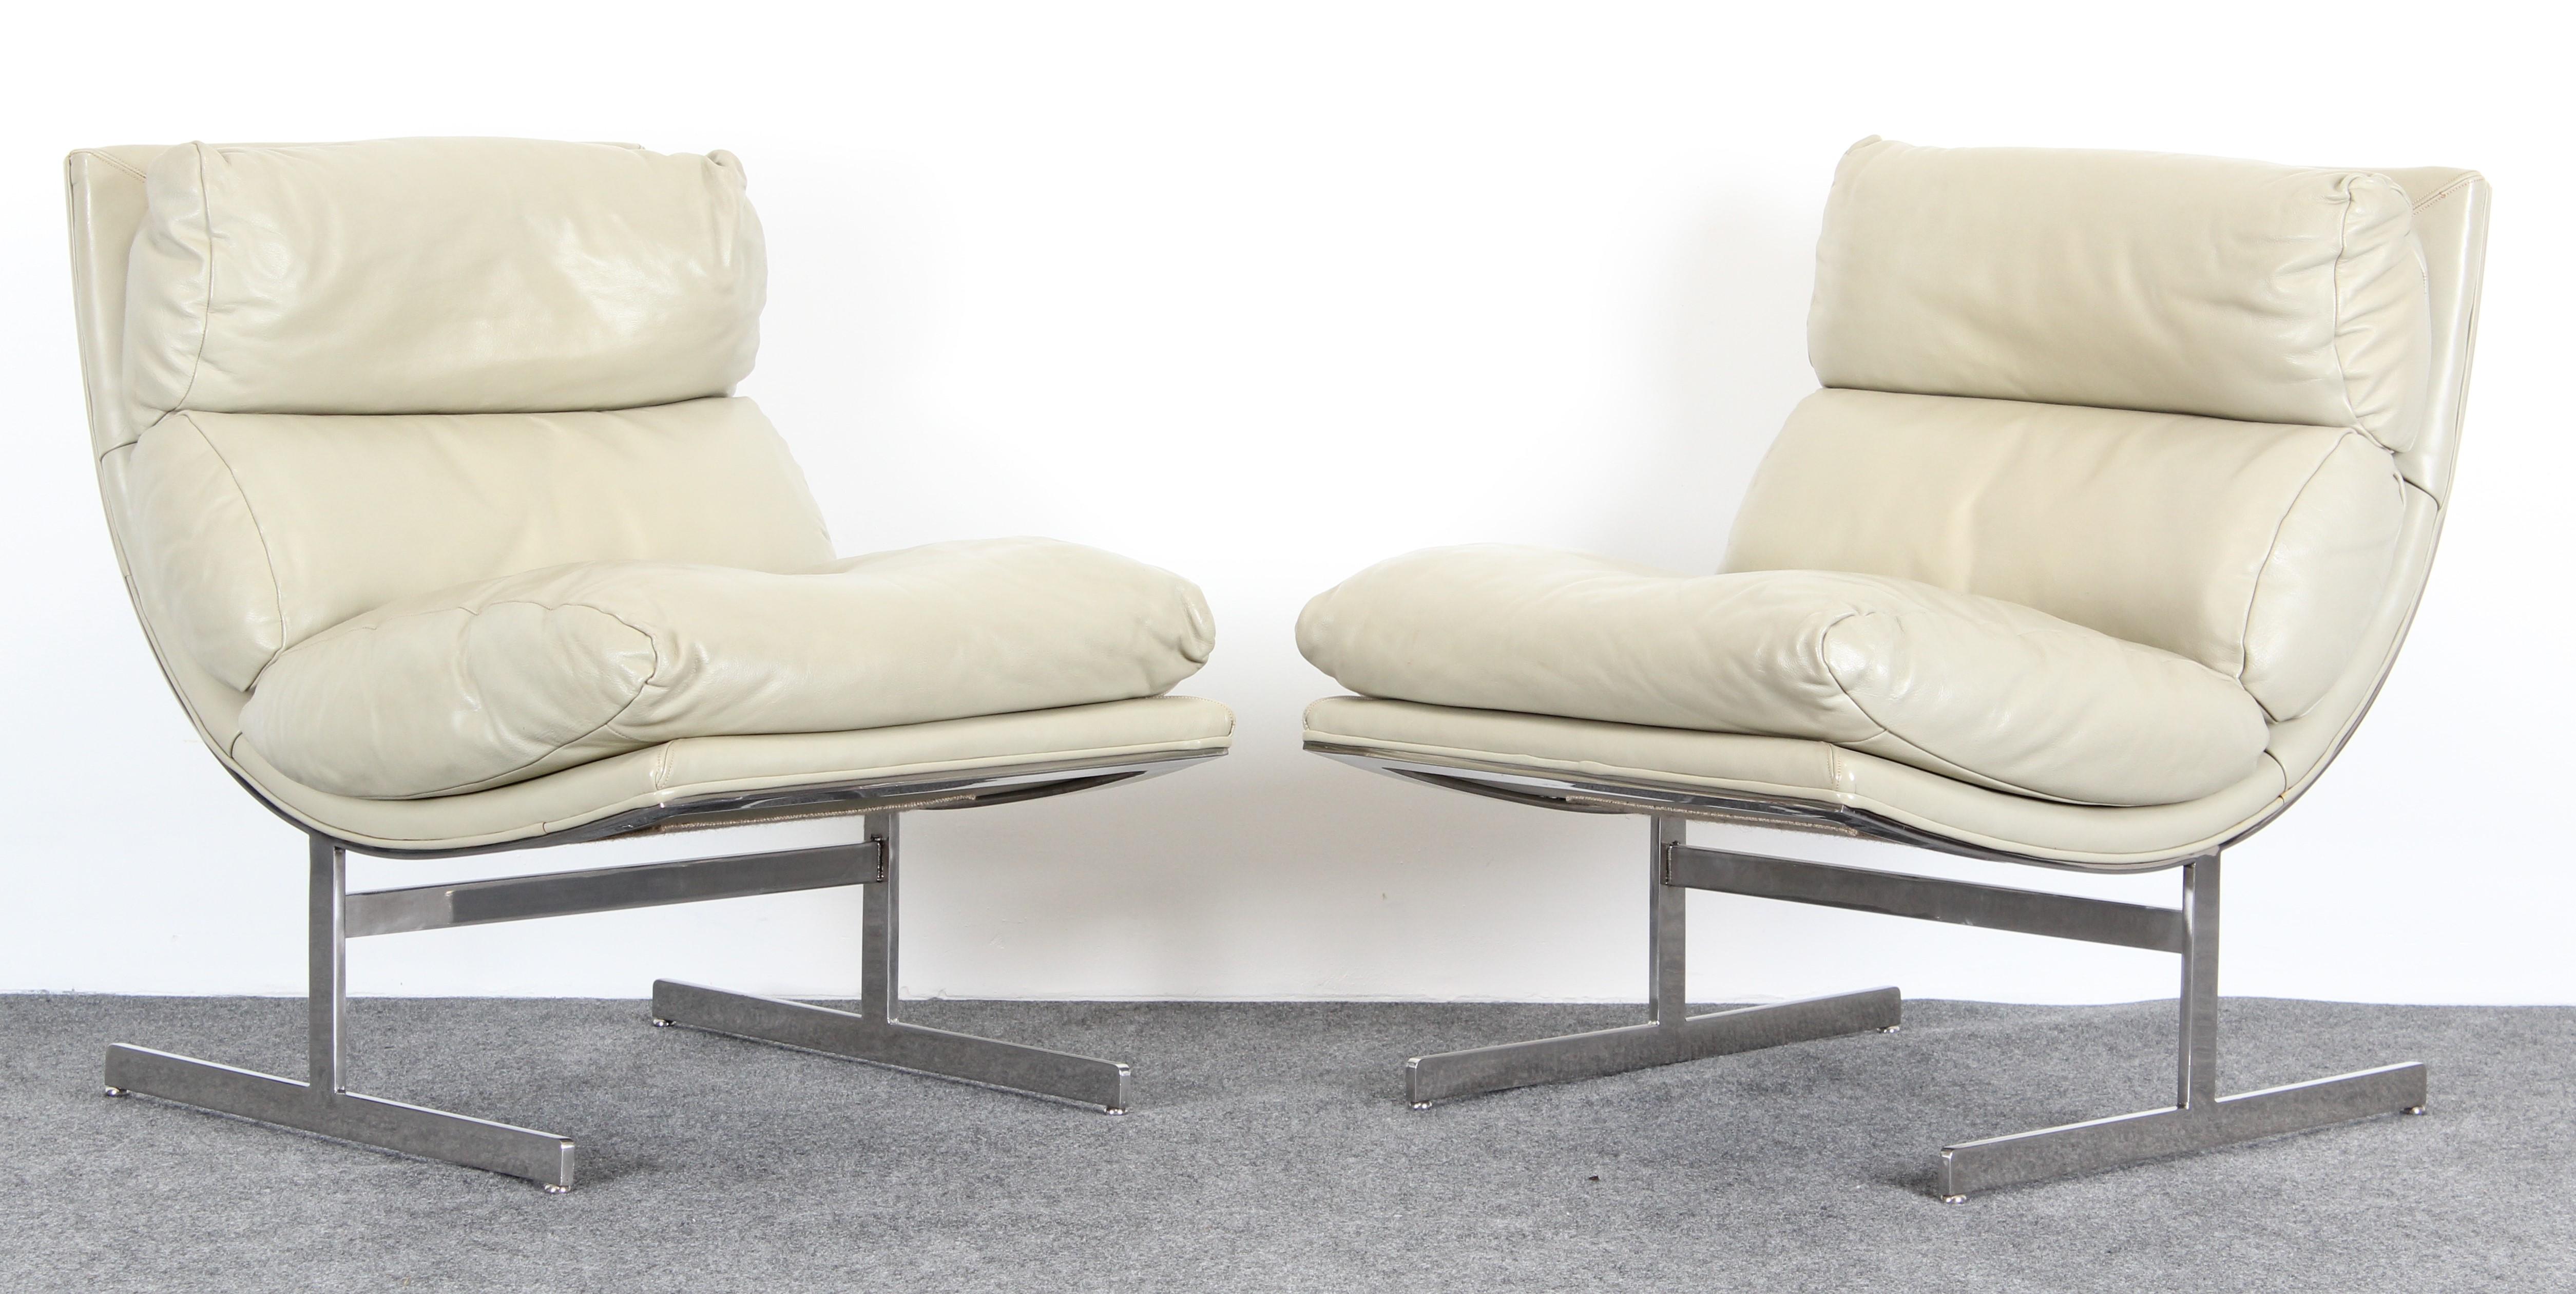 Mid-Century Modern Pair of Kipp Stewart Stainless Steel Lounge Chairs for Directional, 1970s